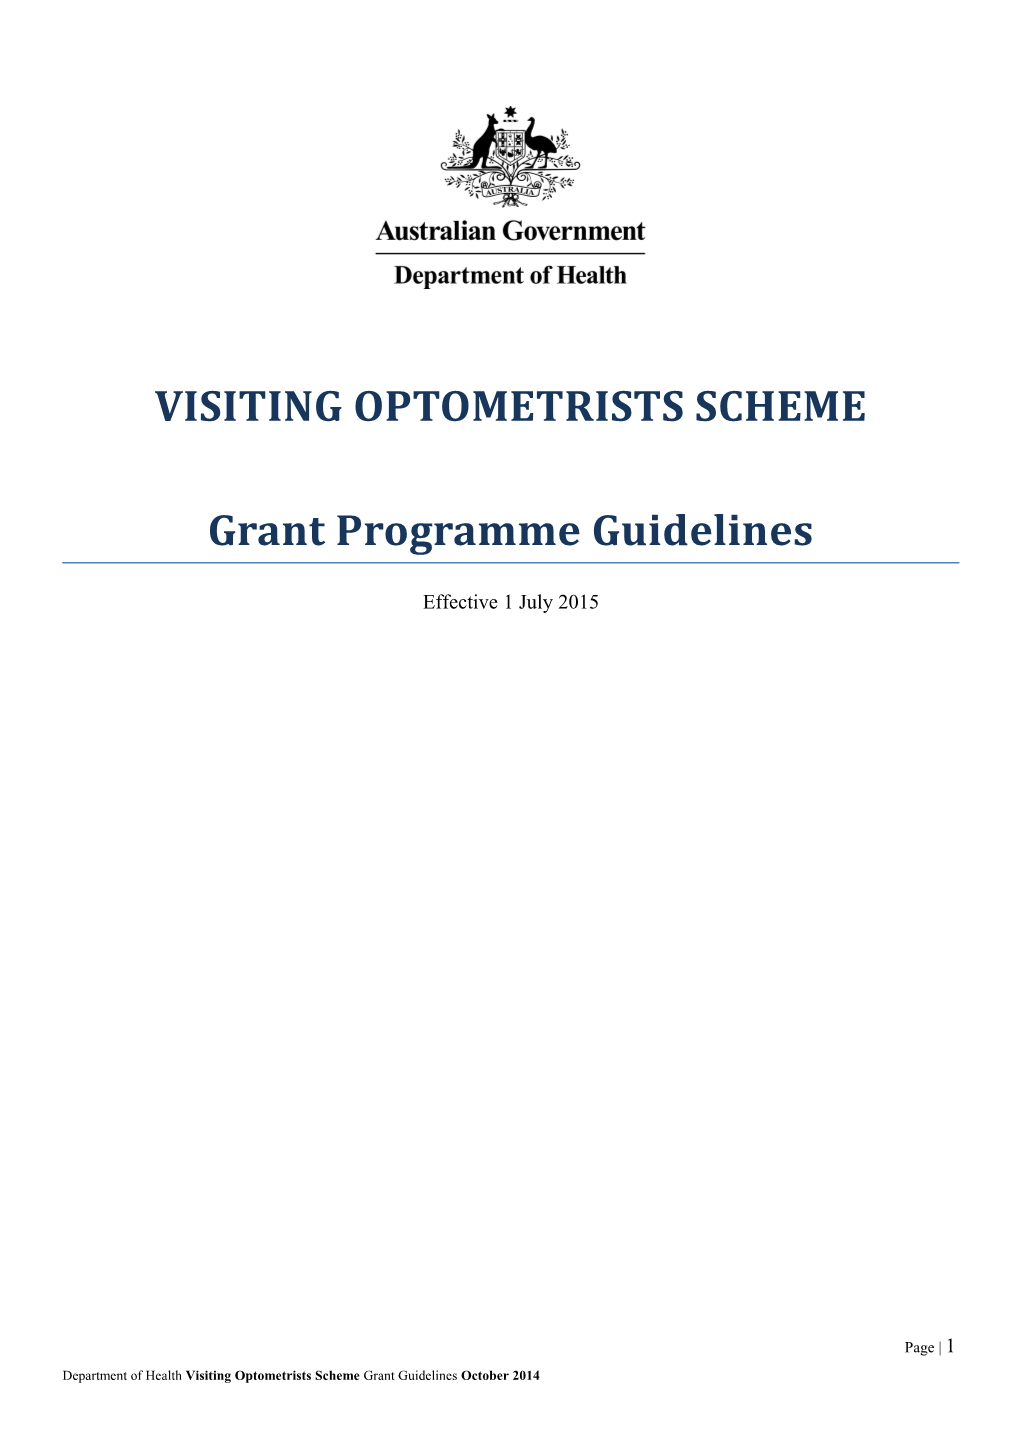 Visiting Optometrists Scheme Grant Programme Guidelines